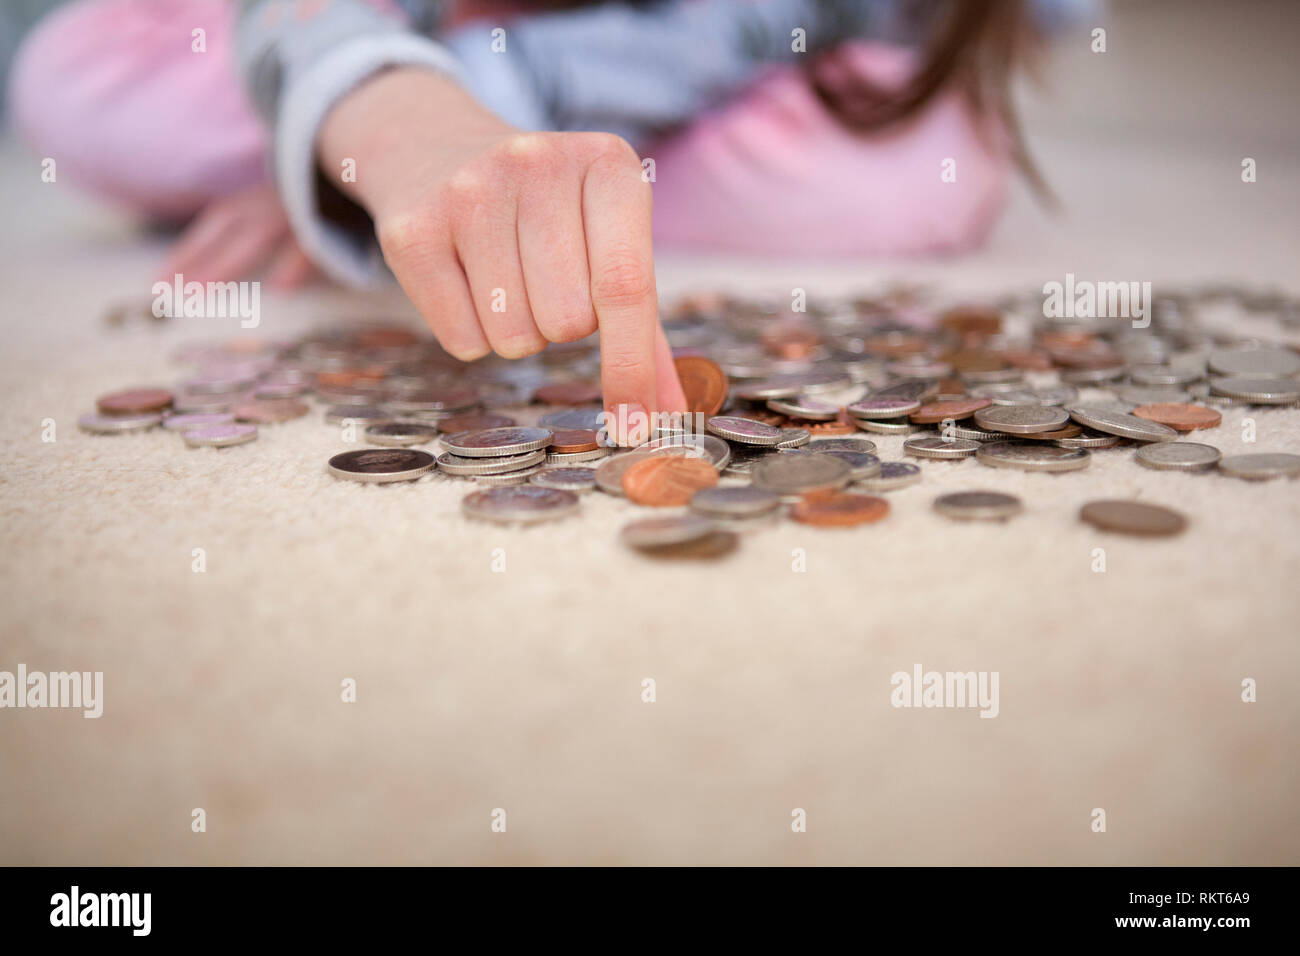 Child counting pocket money coins Stock Photo